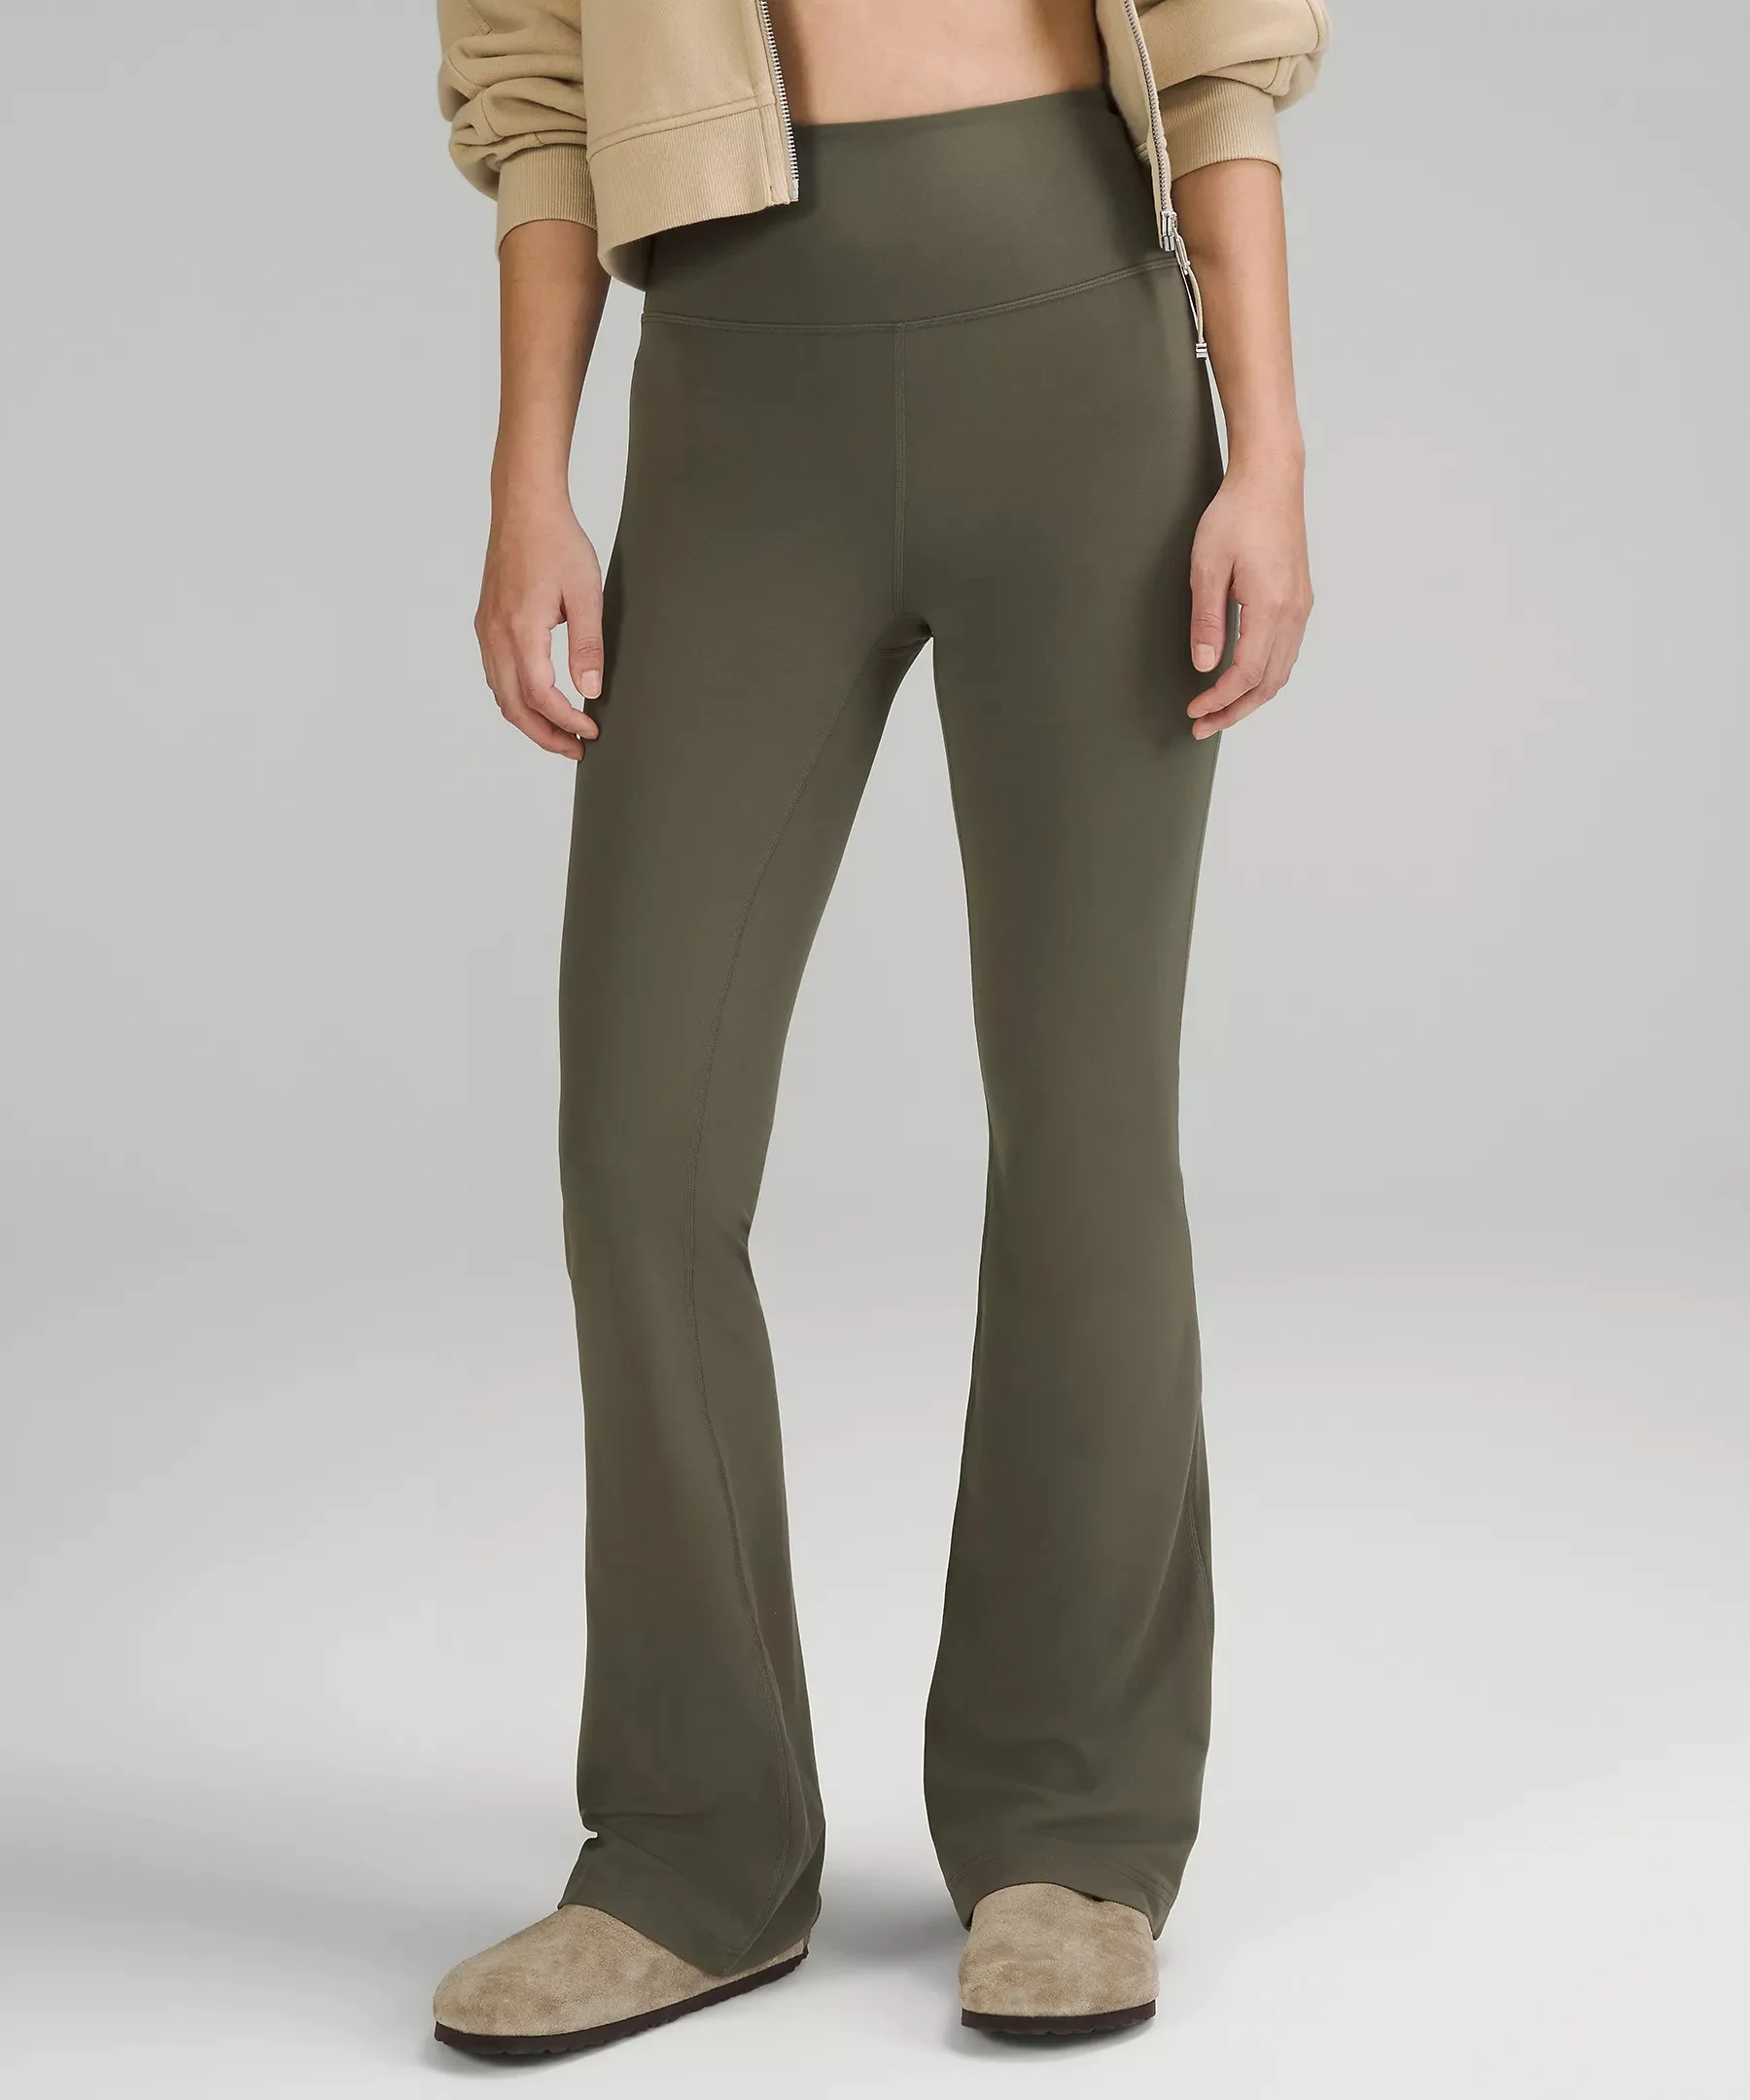 Groove Pant Flare Super High-Rise *Nulu  Flare pants, Pants for women,  Lululemon groove pant